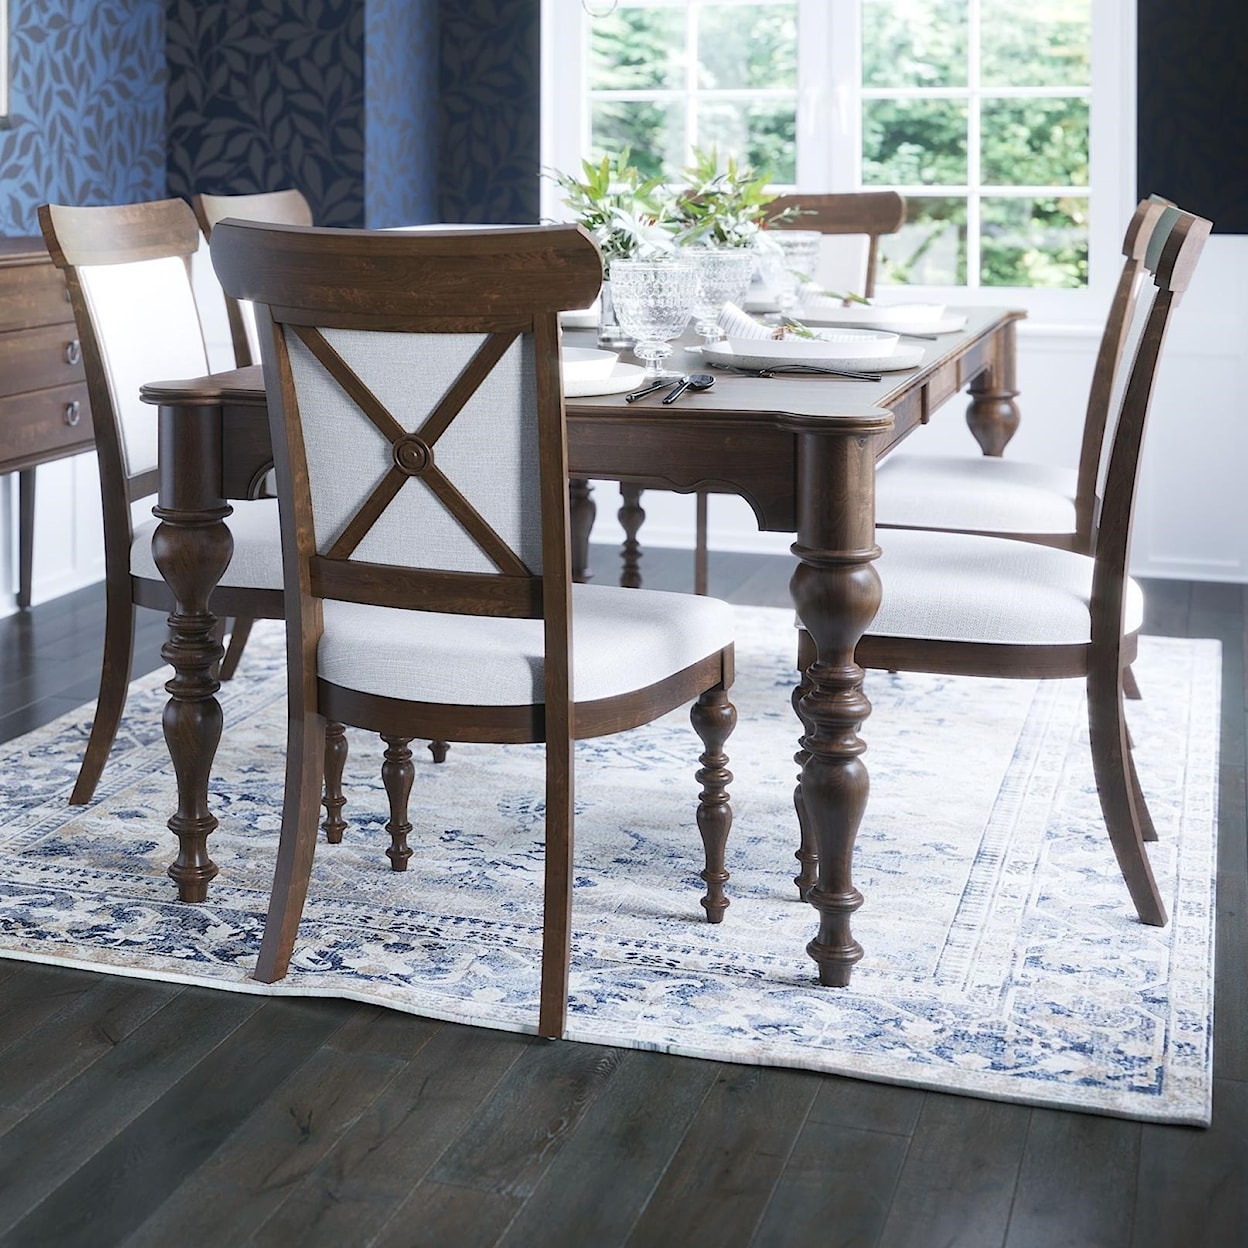 Canadel Classic Rectangular Dining Table Set